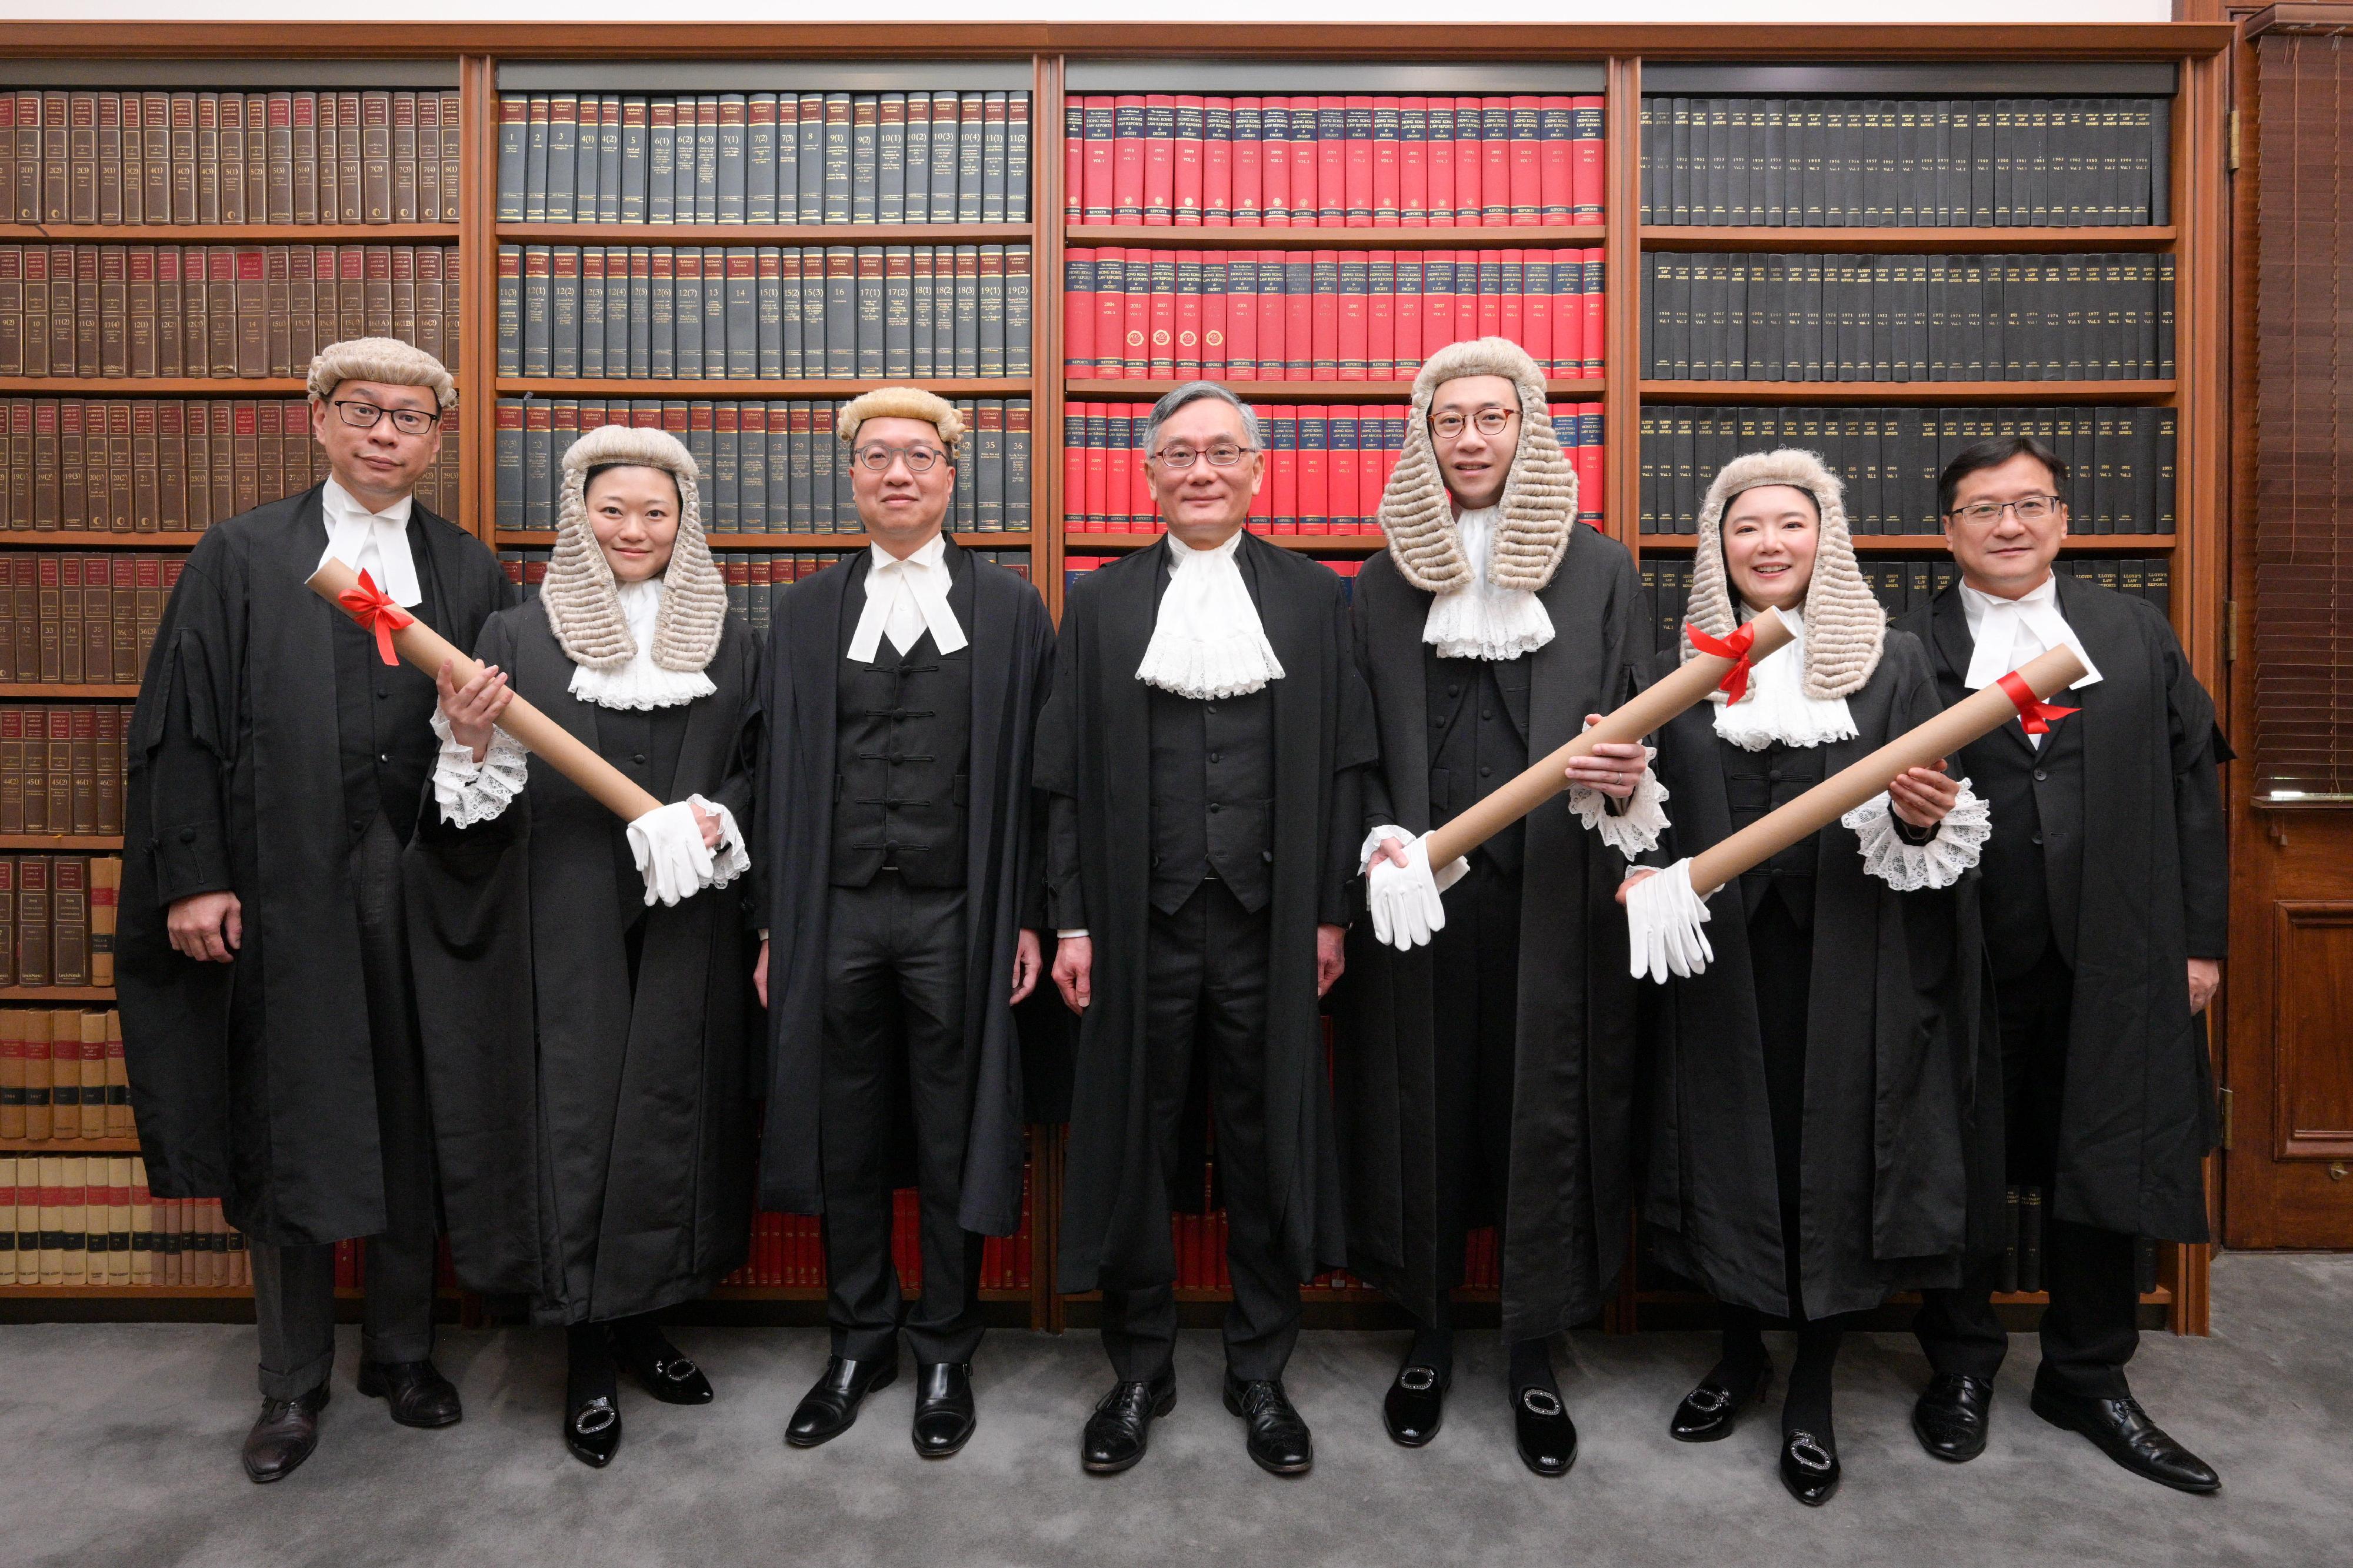 The ceremonial proceedings for the admission of newly appointed Senior Counsel took place at the Court of Final Appeal today (May 11). Photo shows Chief Justice Andrew Cheung Kui-nung, Chief Justice of the Court of Final Appeal (centre); the Secretary for Justice, Mr Paul Lam, SC (third left); the Chairman of the Hong Kong Bar Association, Mr Victor Dawes, SC (first left); and the President of the Law Society of Hong Kong, Mr Chan Chak-ming (first right), with the newly appointed Senior Counsel Mr Benson Tsoi (third right), Ms Frances Lok (second left), and Miss Queenie Lau (second right).
